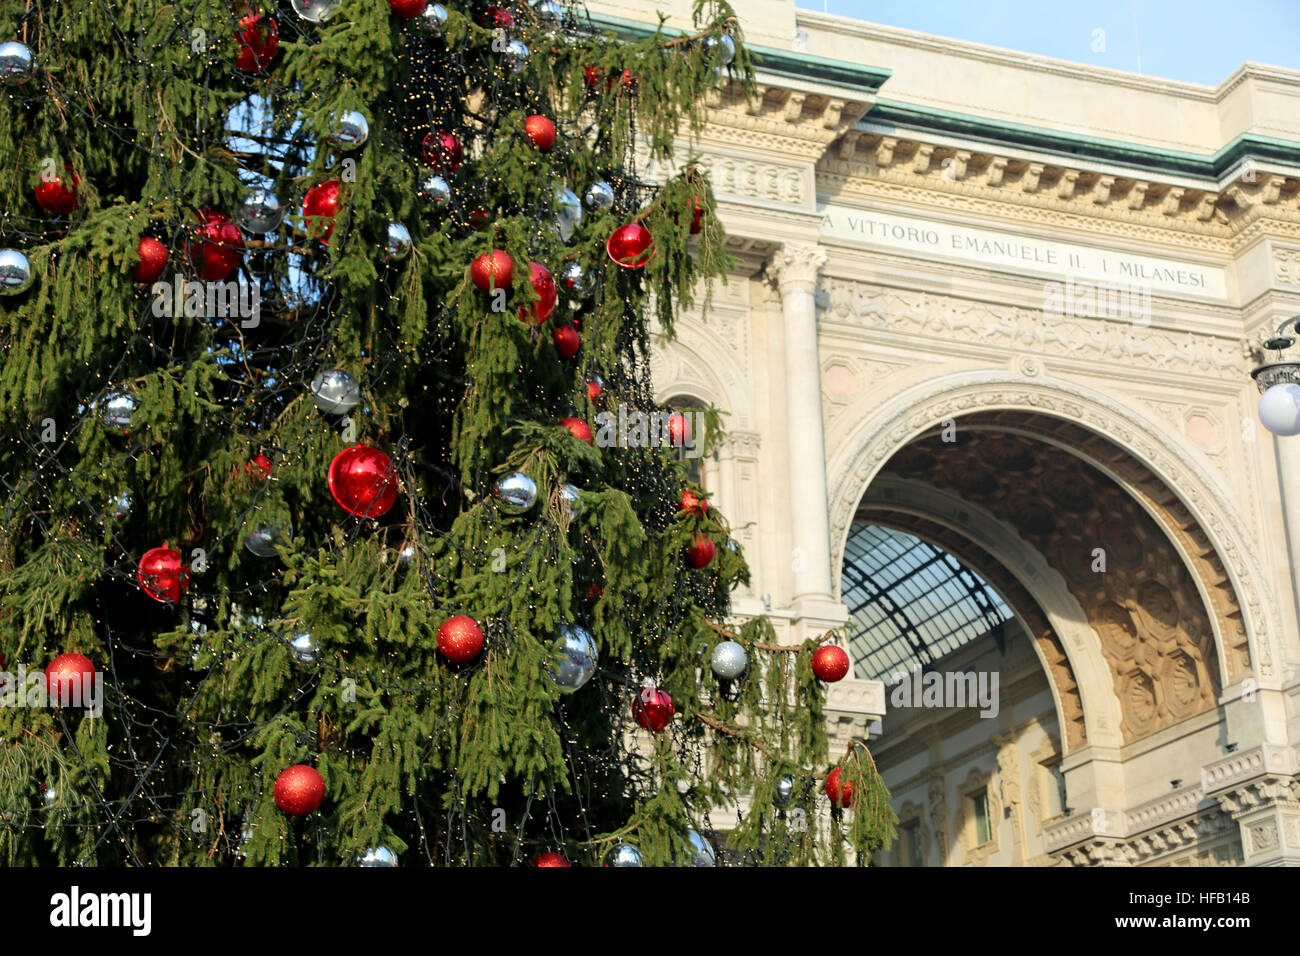 Huge ornated Christmas tree and building dedicated to the King of Italy Victor Emmanuel II in Milan in Italy Stock Photo